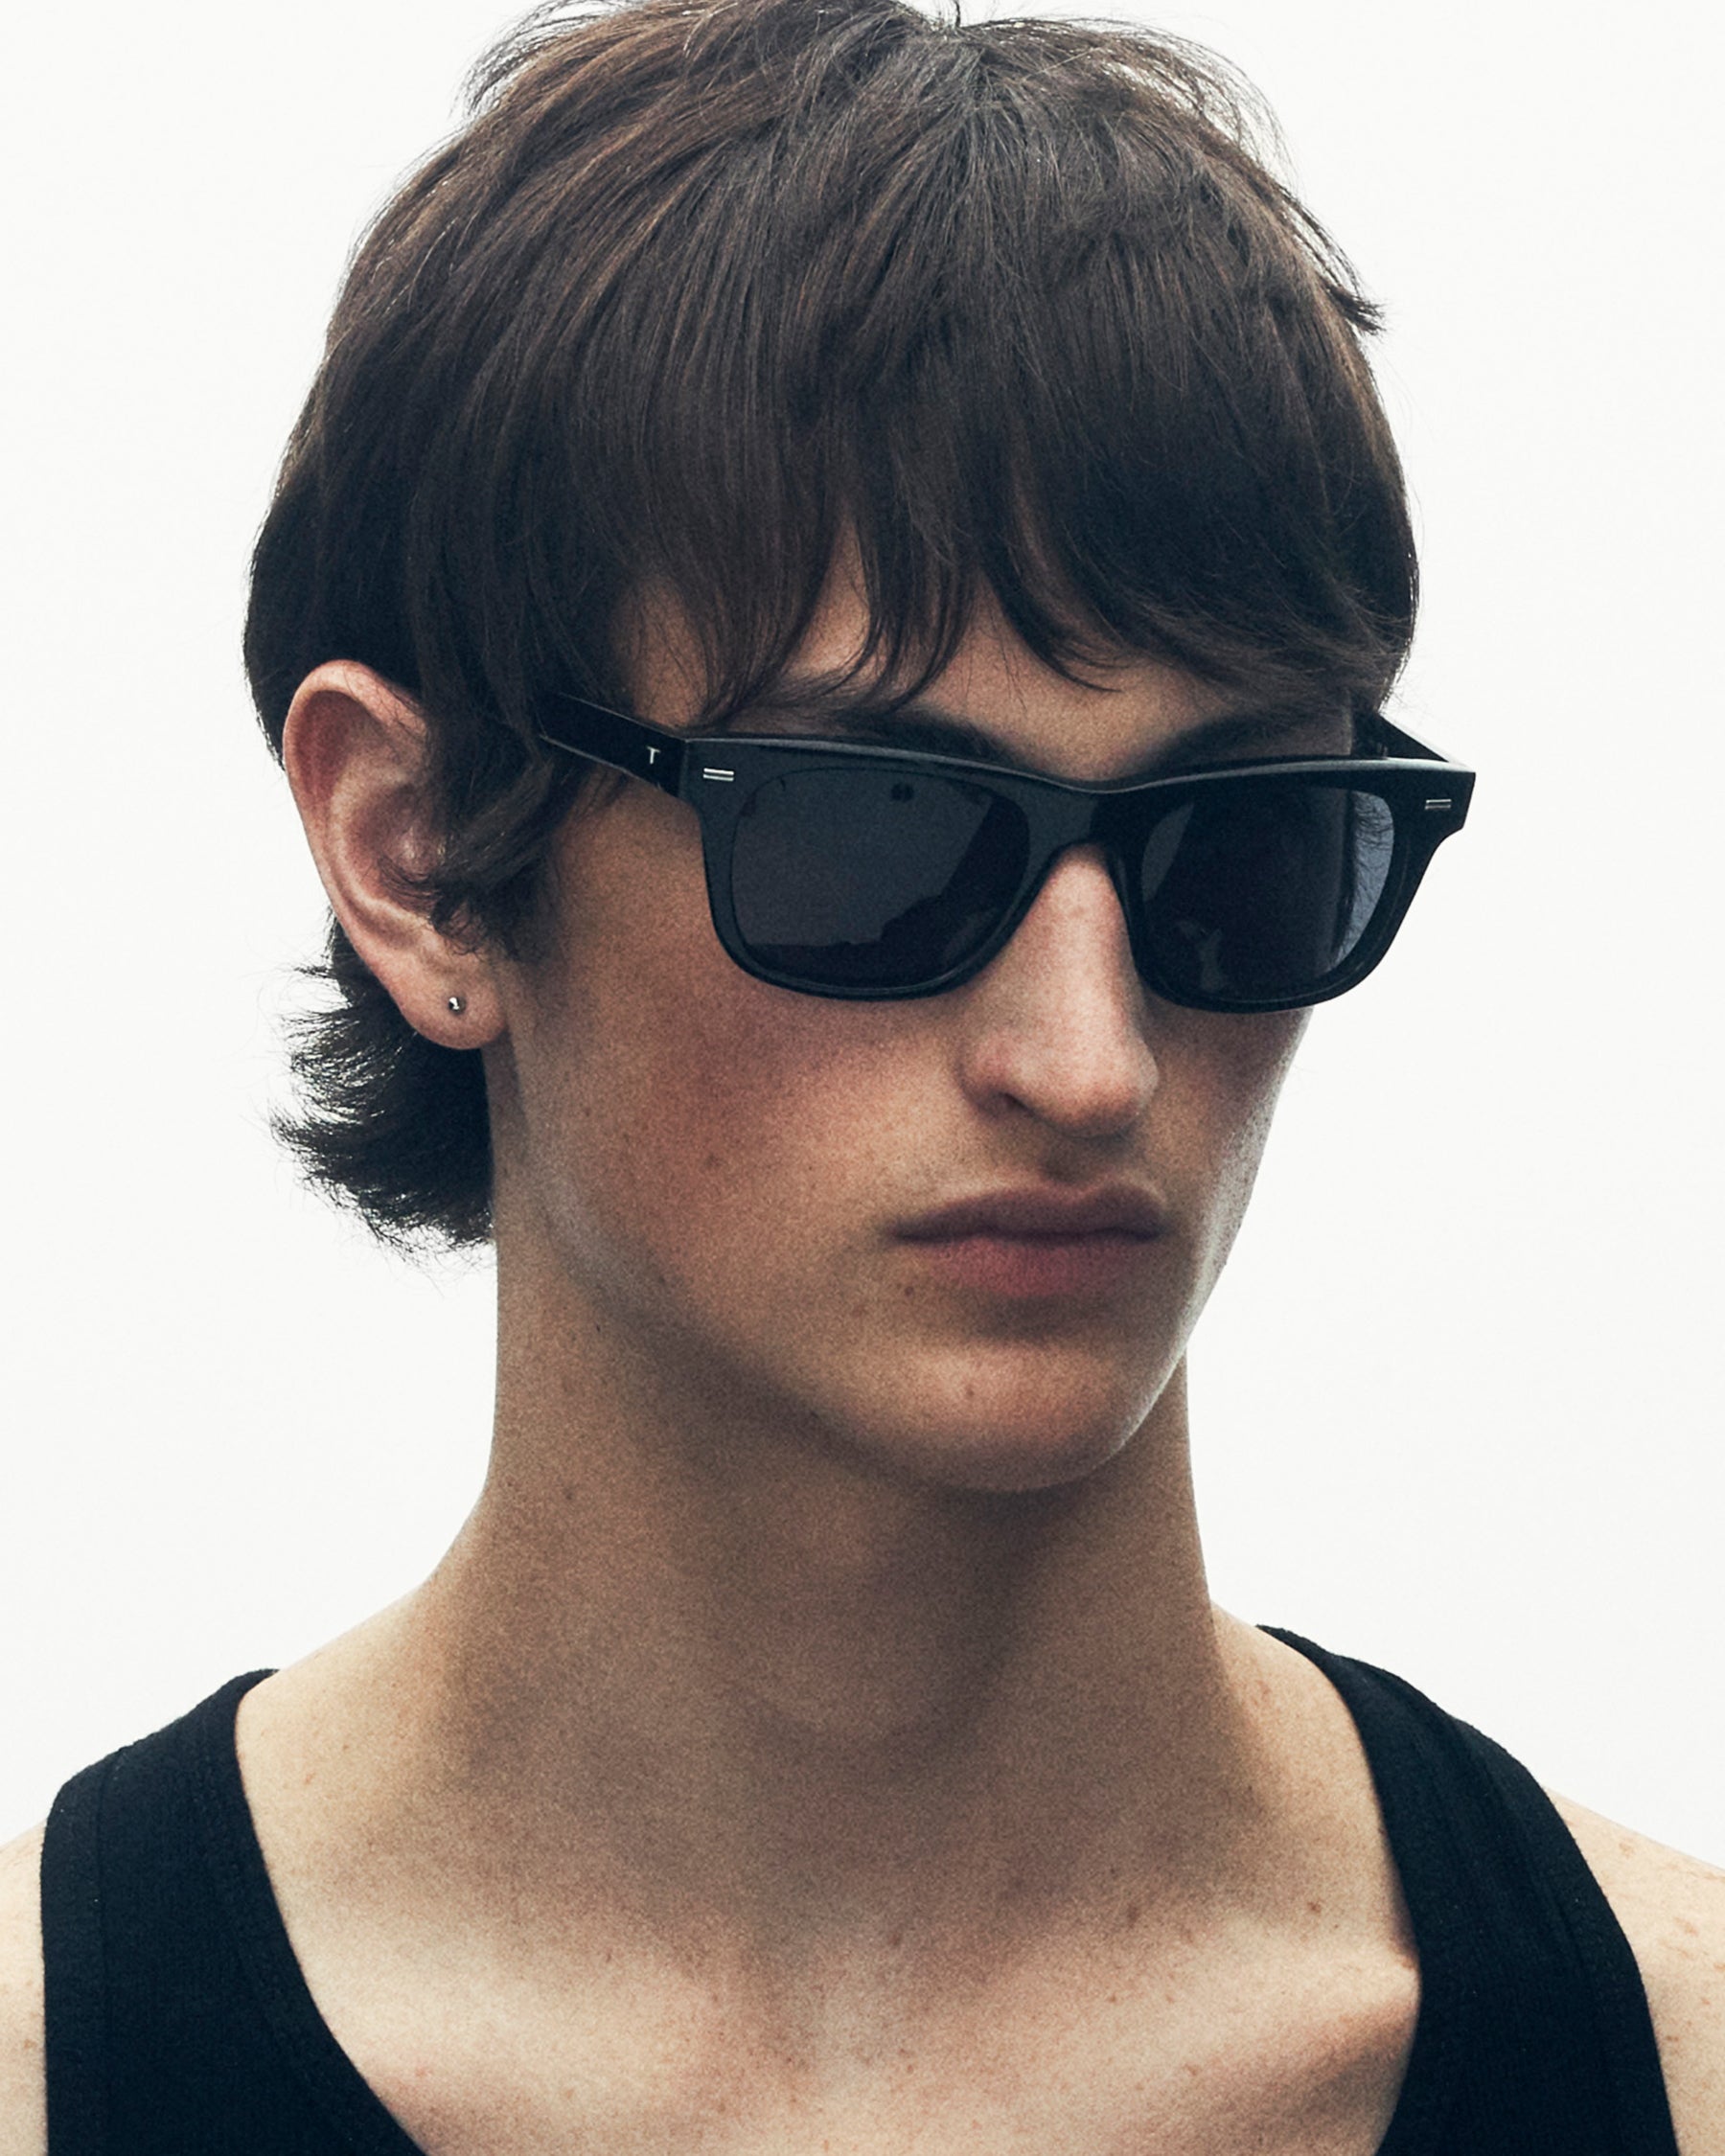 model wearing sunglasses. he is looking off to the side.